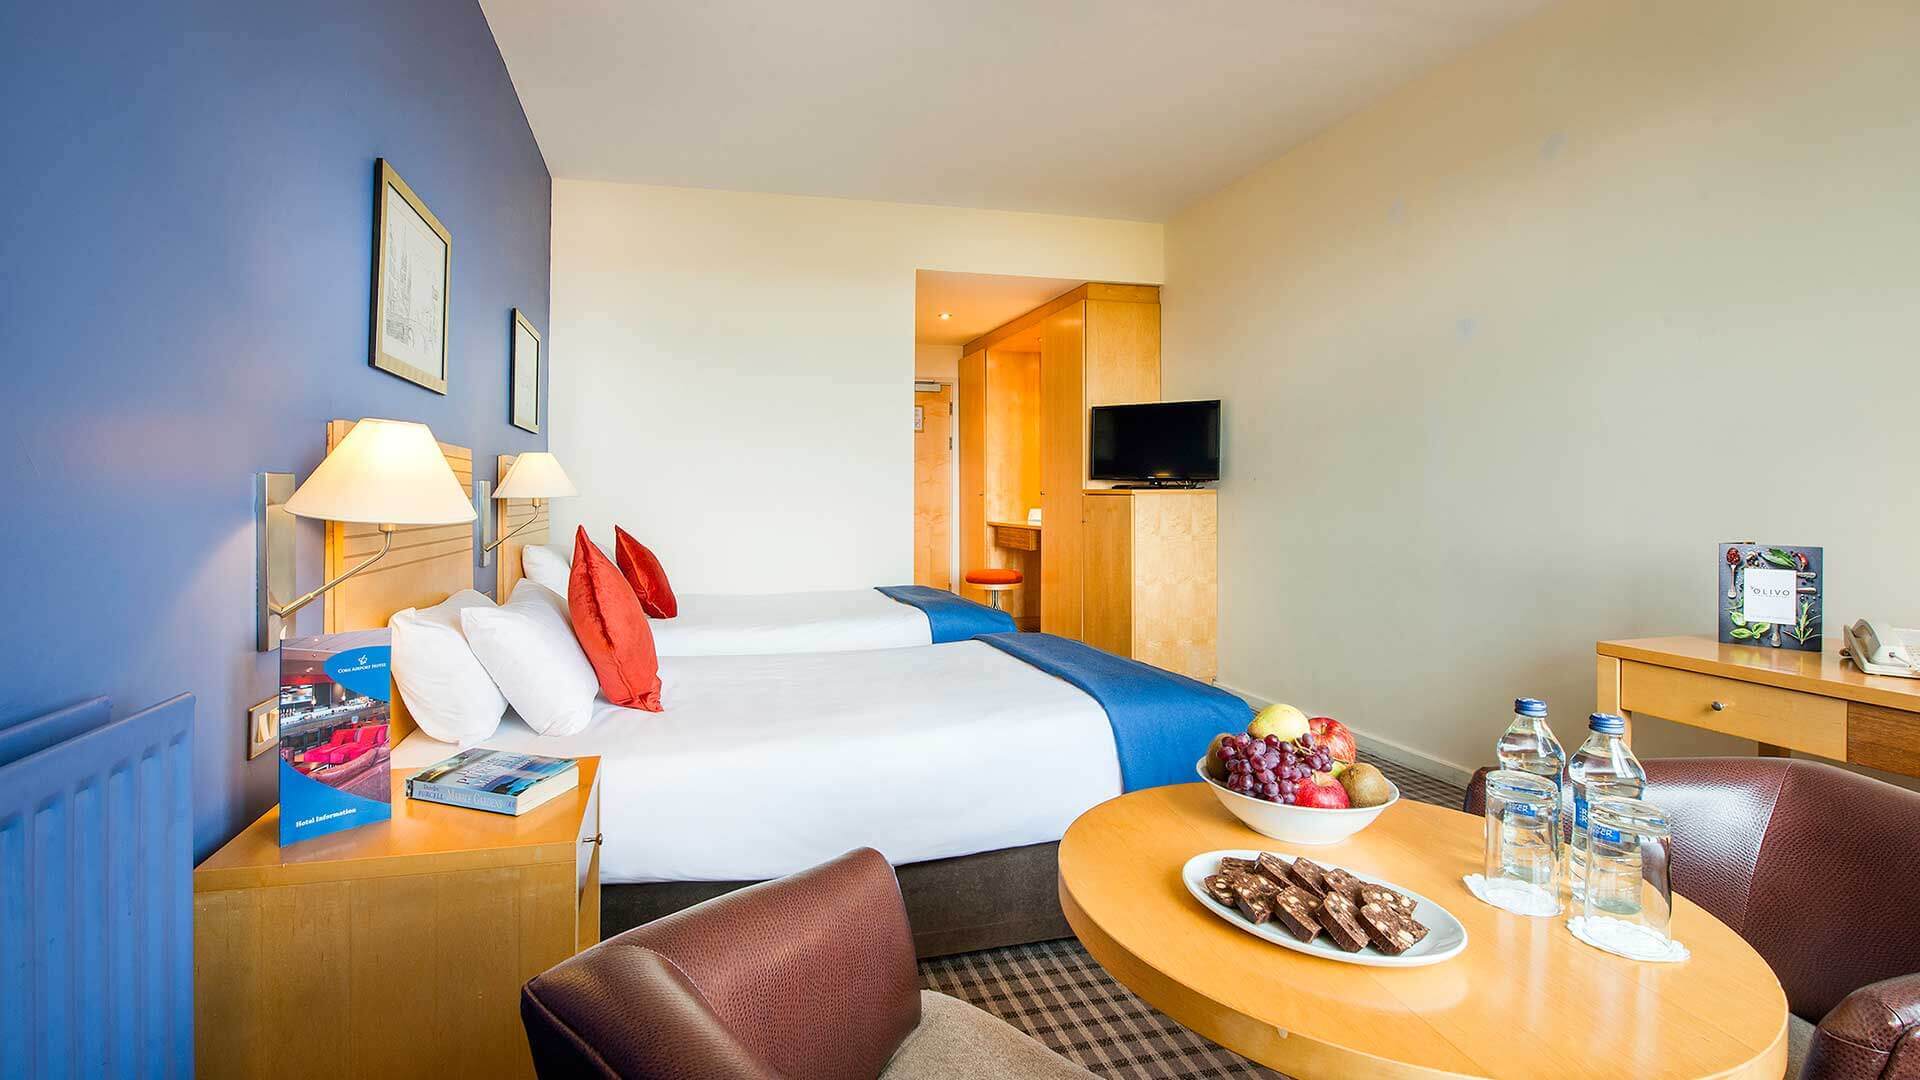 Twin room showing treats on the table and two spotless single beds